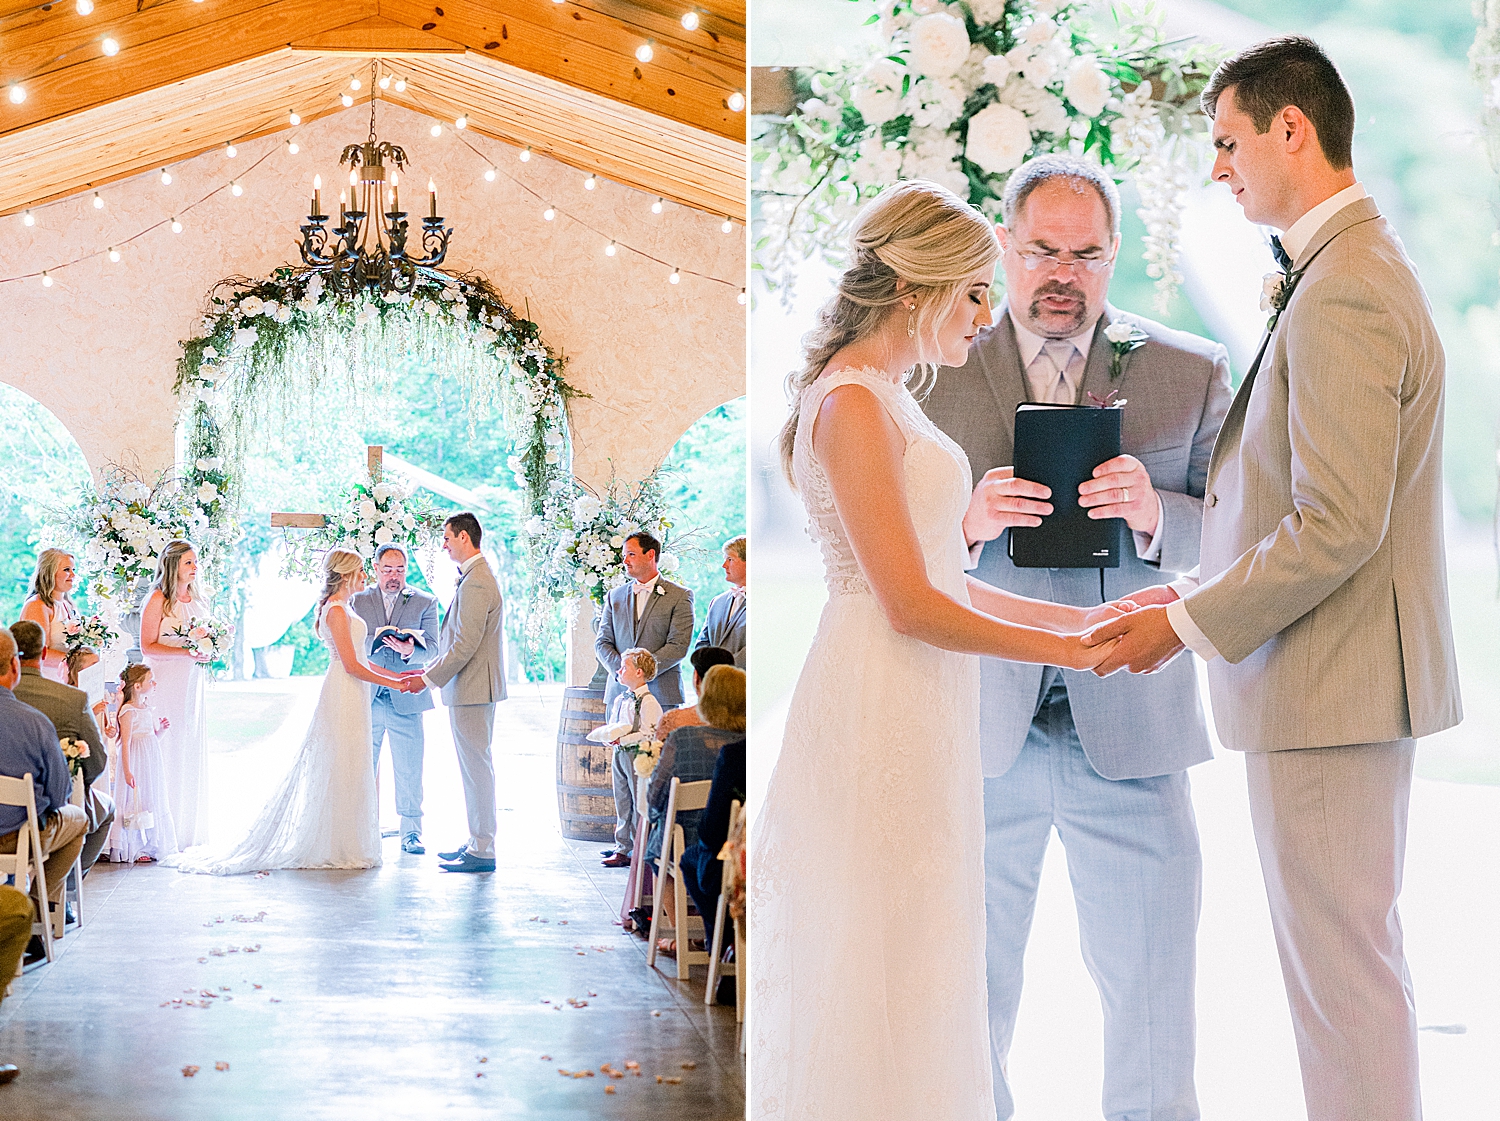 Creekside Meadows wedding ceremony with wooden cross